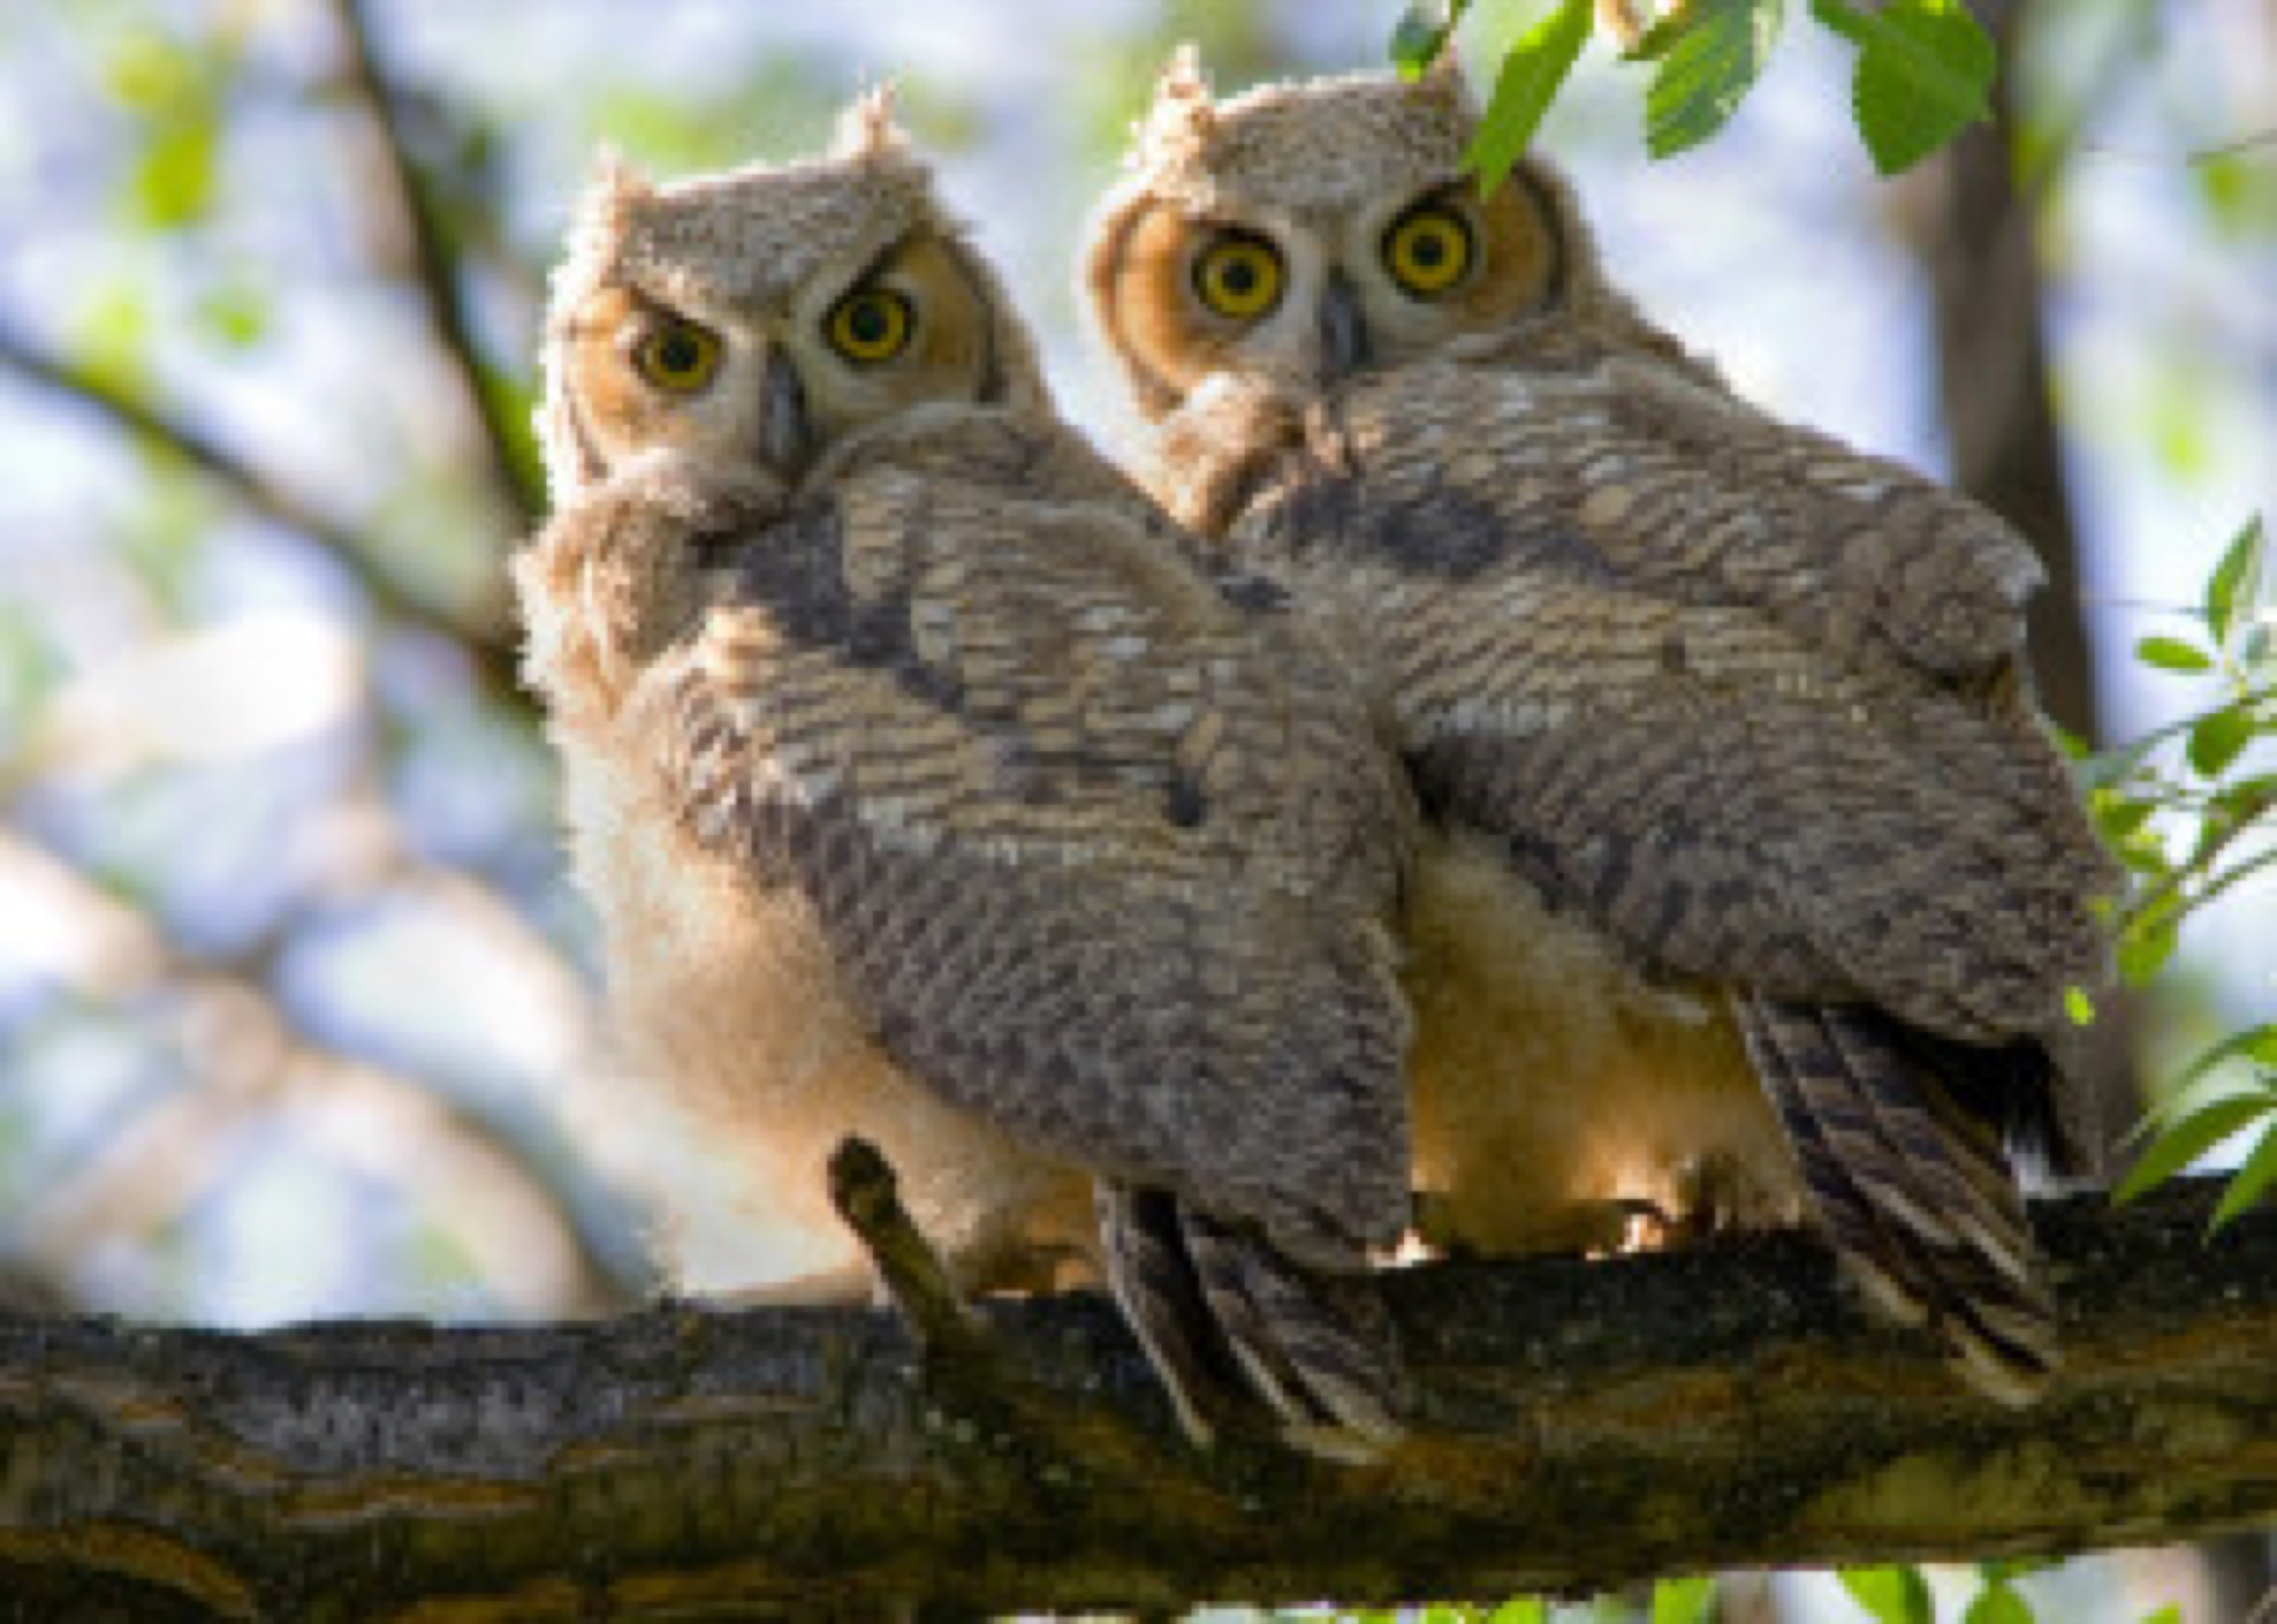 Blog image - great horned owl - stock photo bought